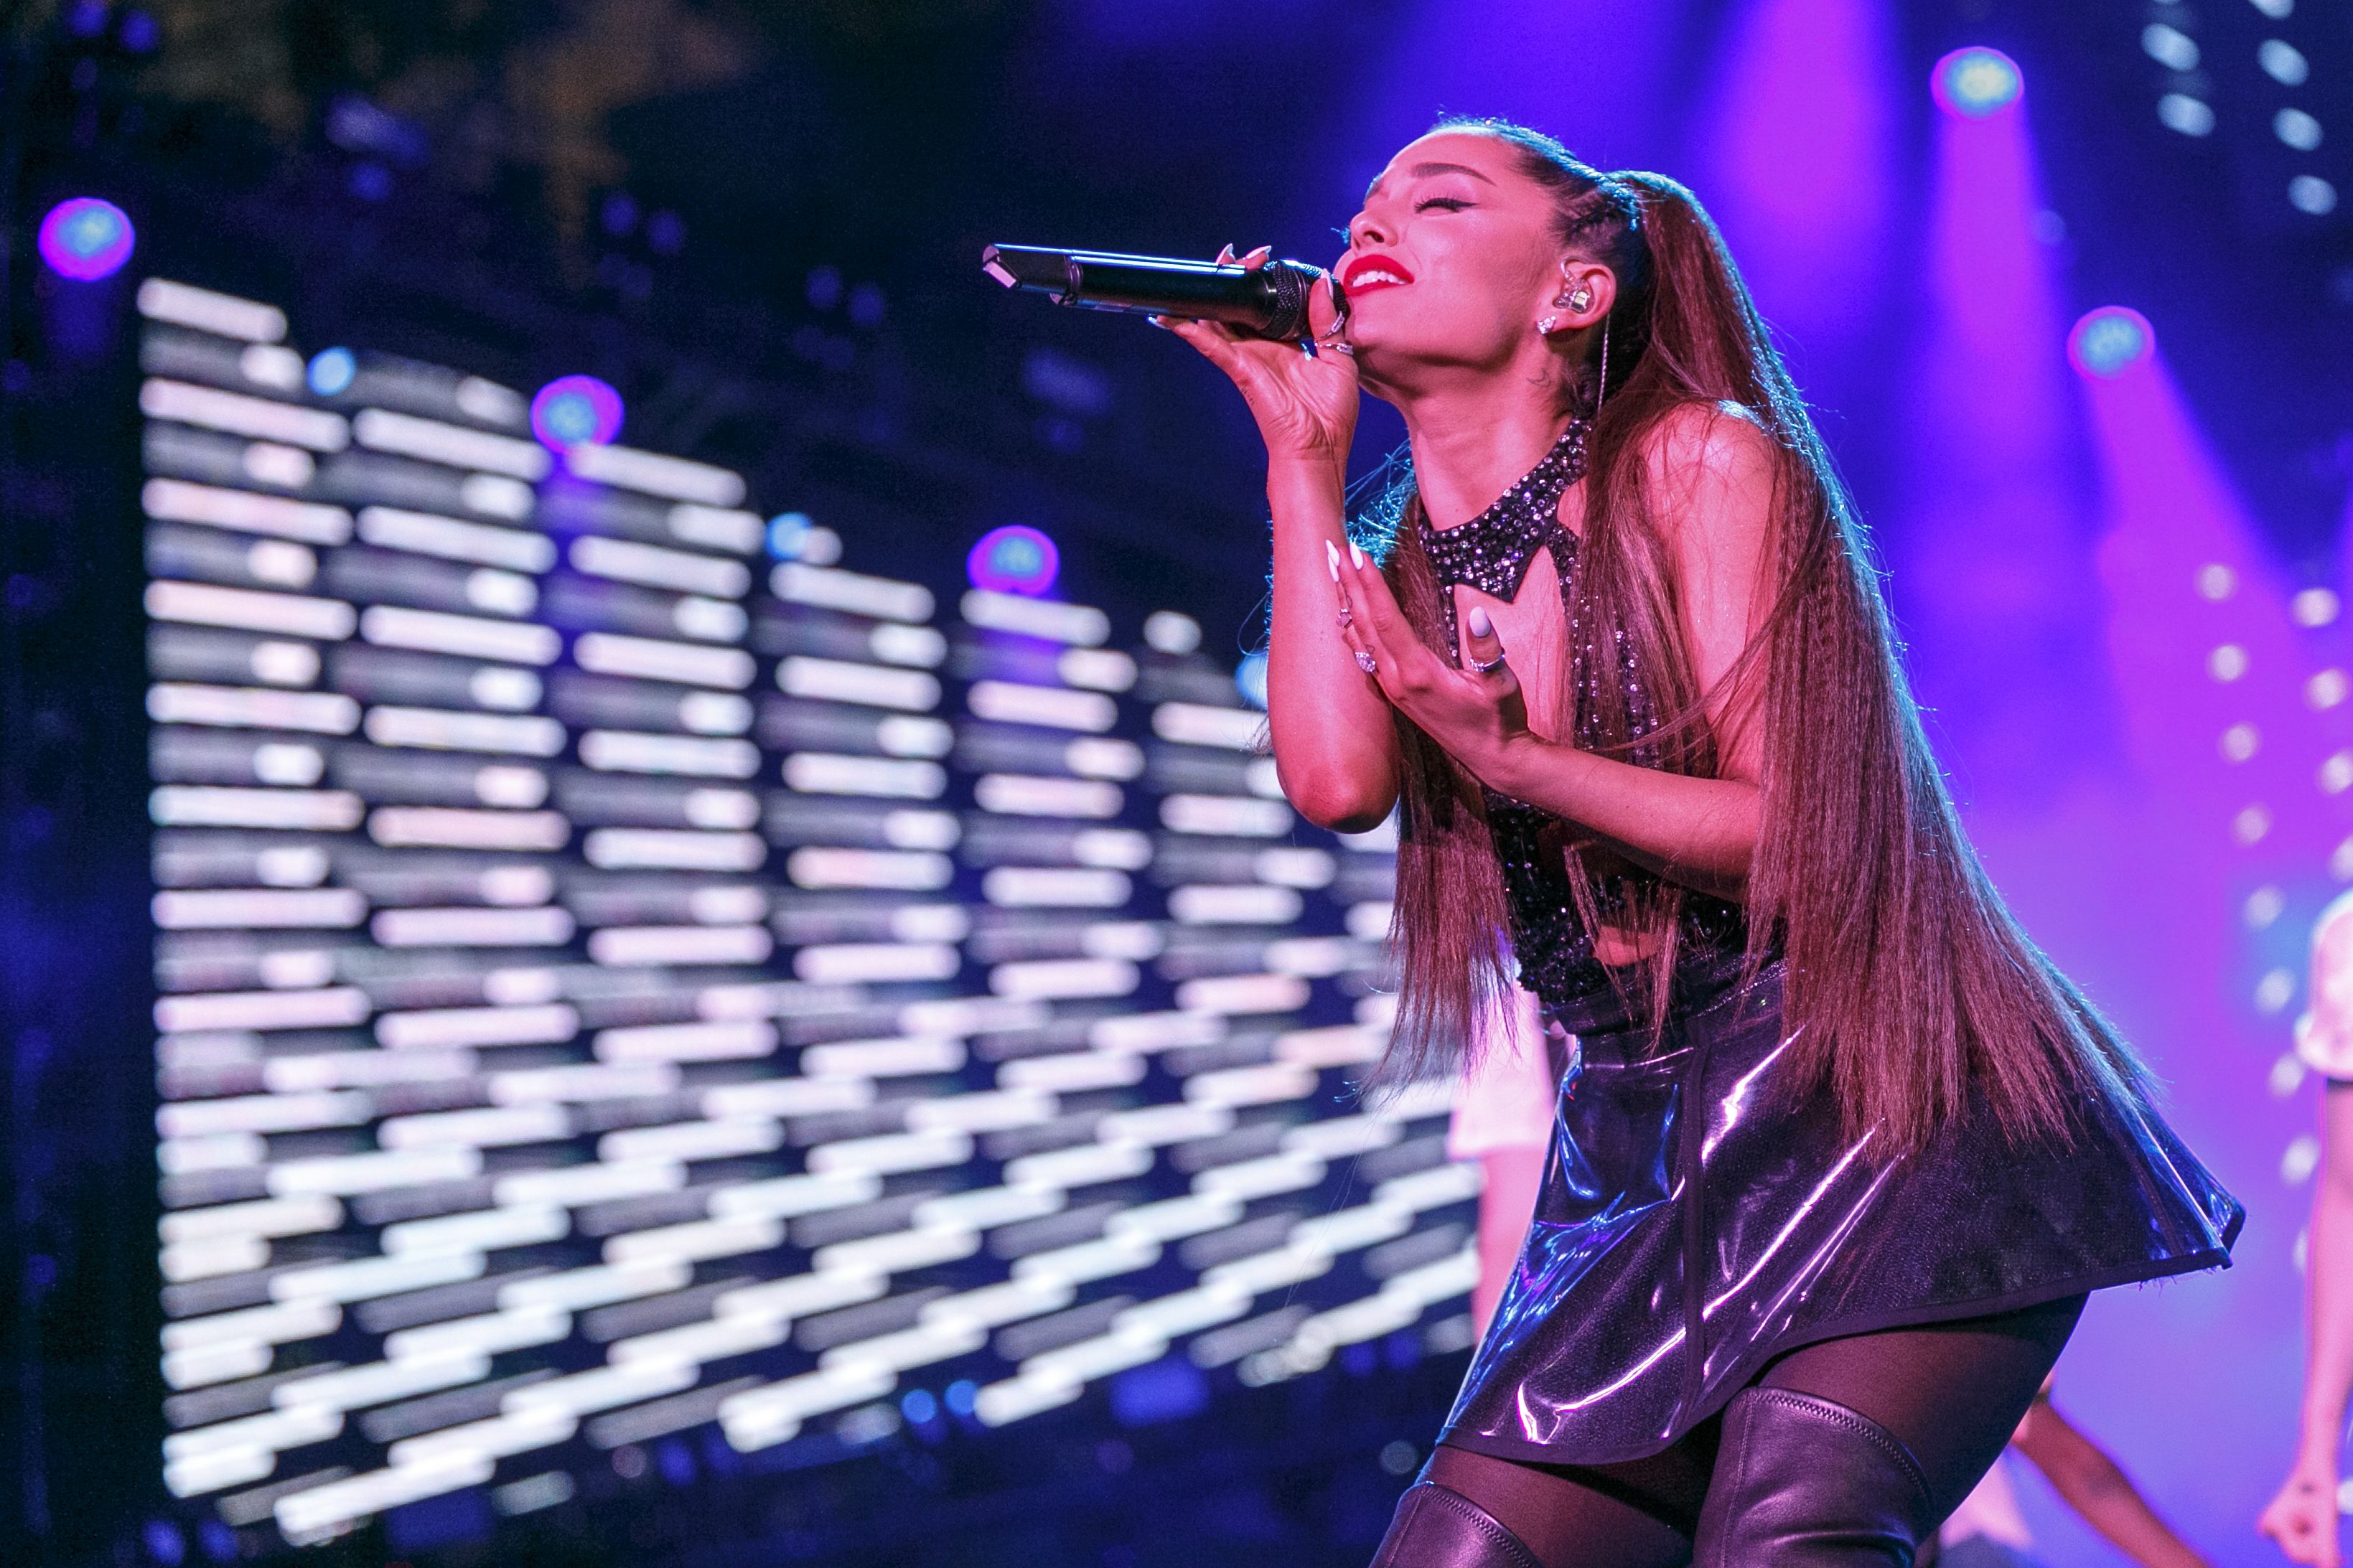 Ariana Grande suing Forever 21 for using 'lookalike' model - BBC Newsround